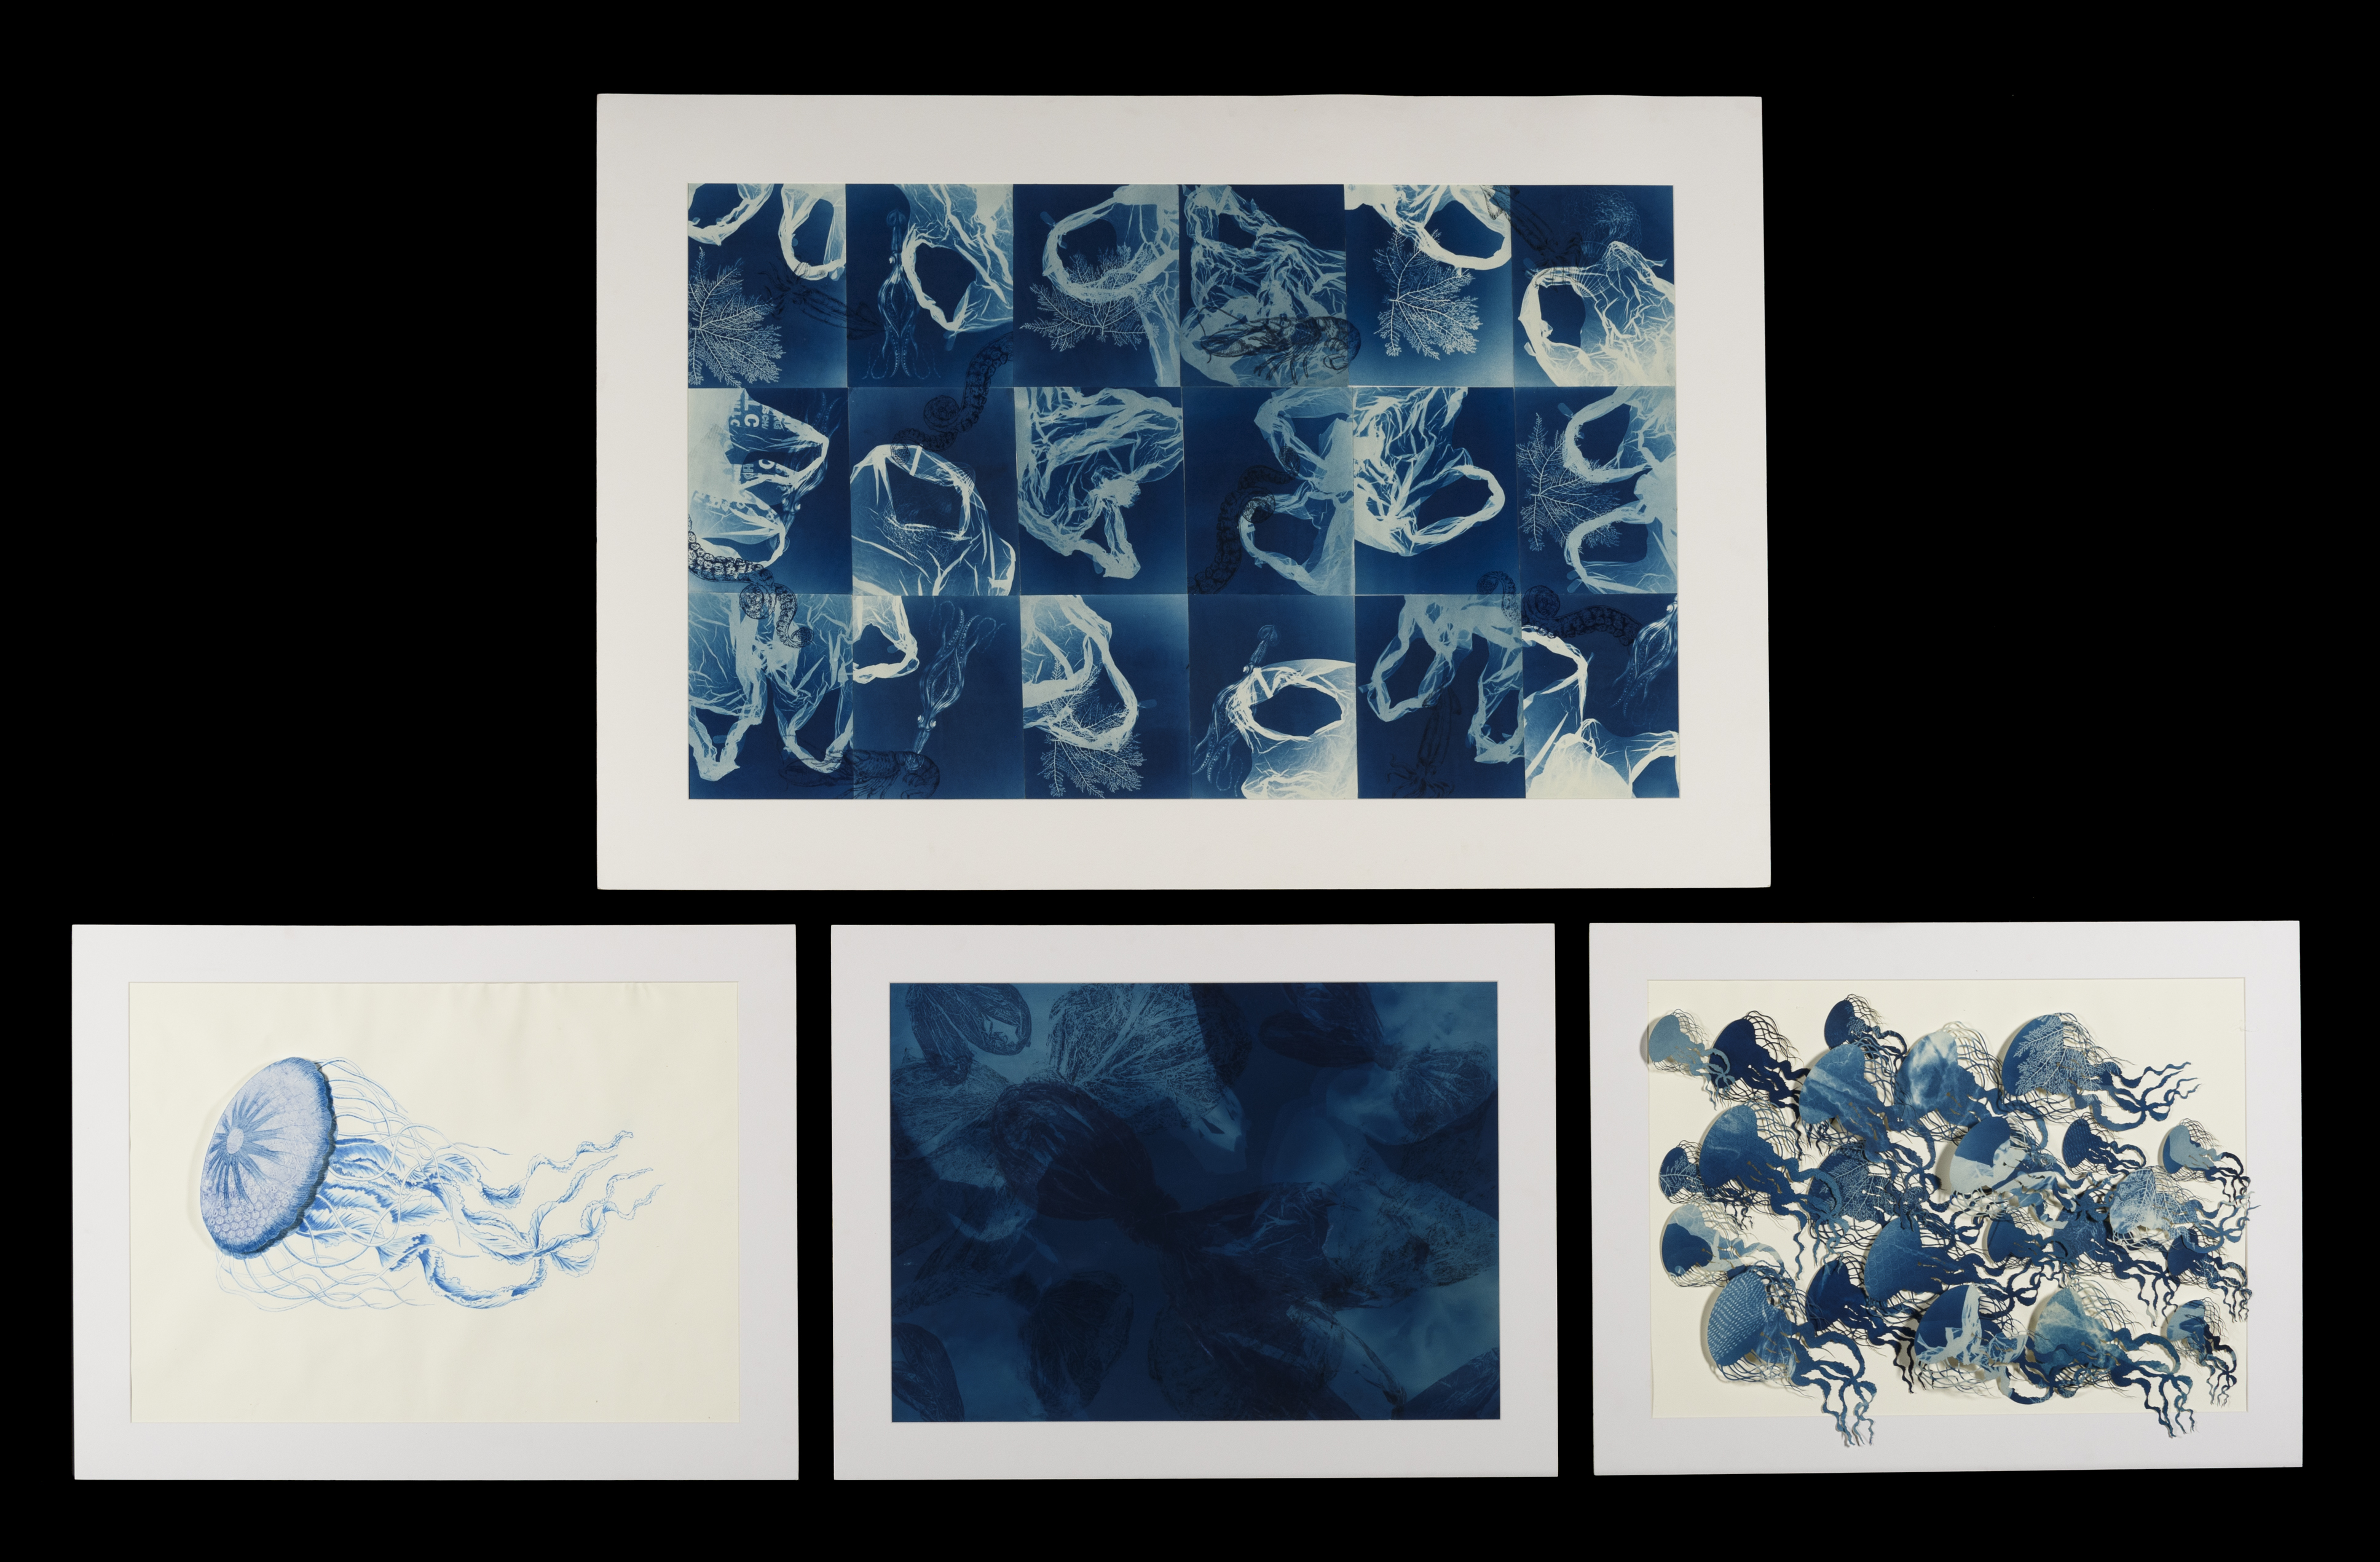 A series of four cyanotypes showing jellyfish and plastic bags.